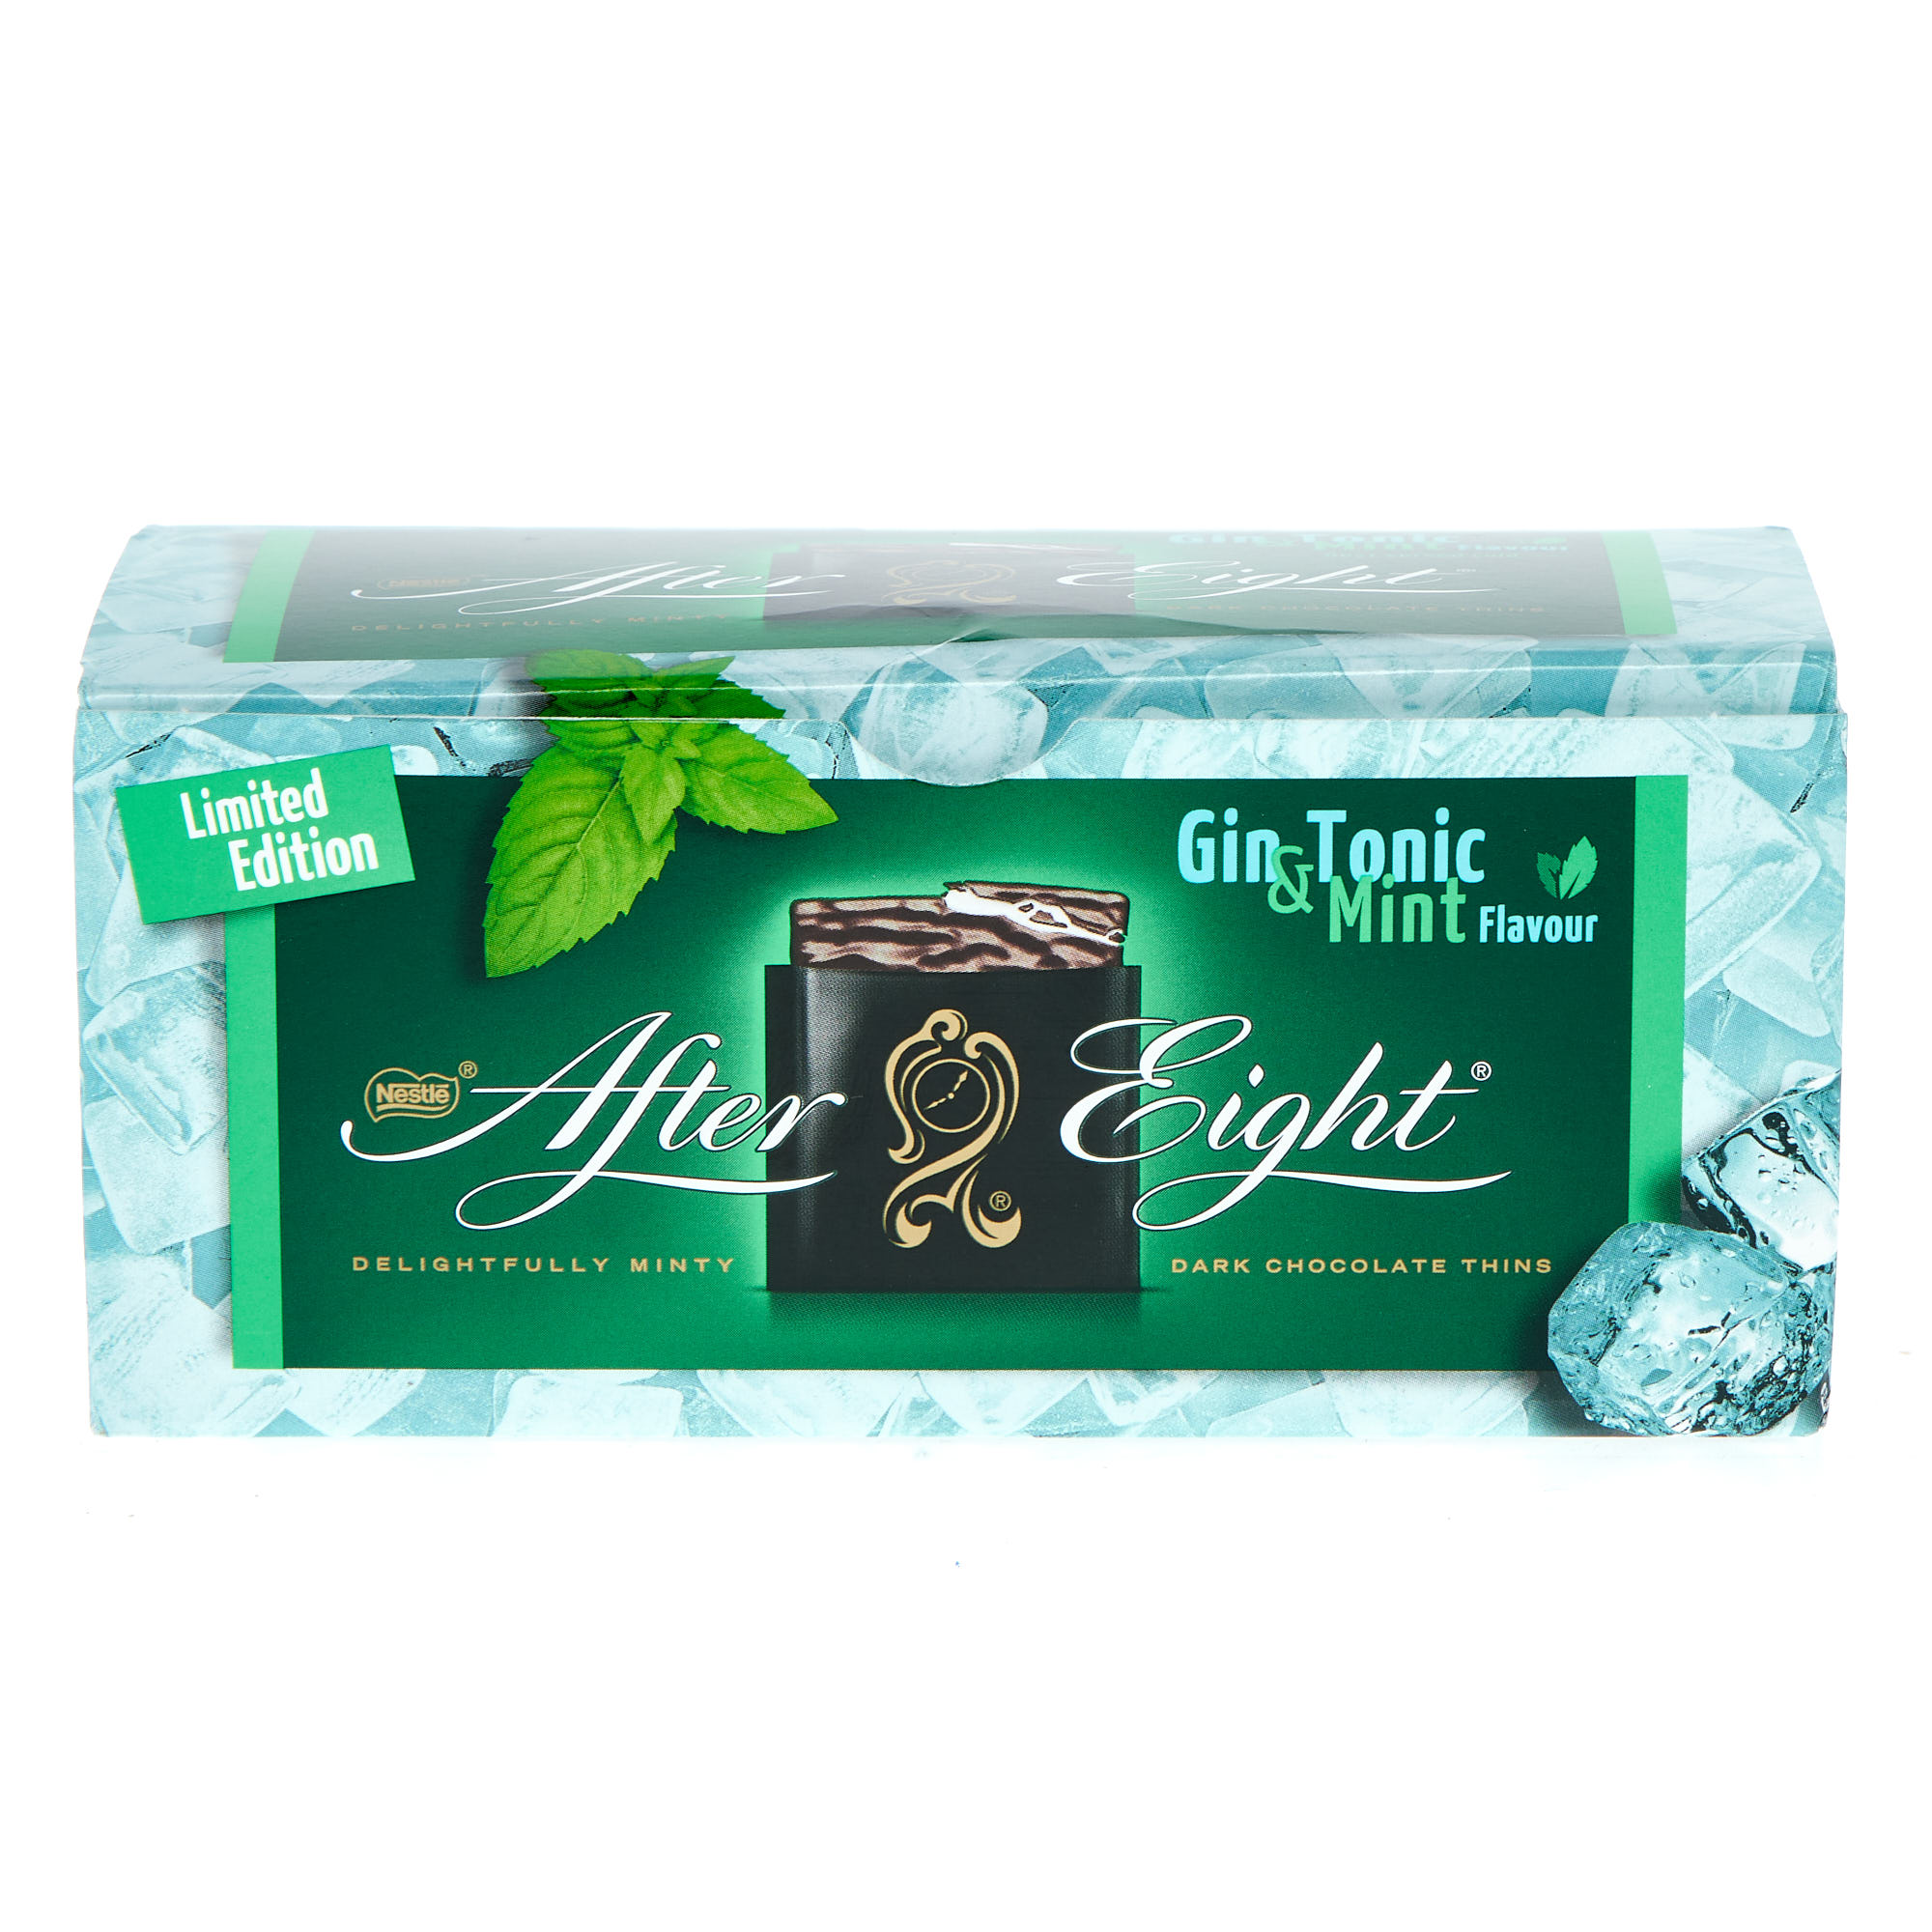 Gin & Tonic Mint After Eights